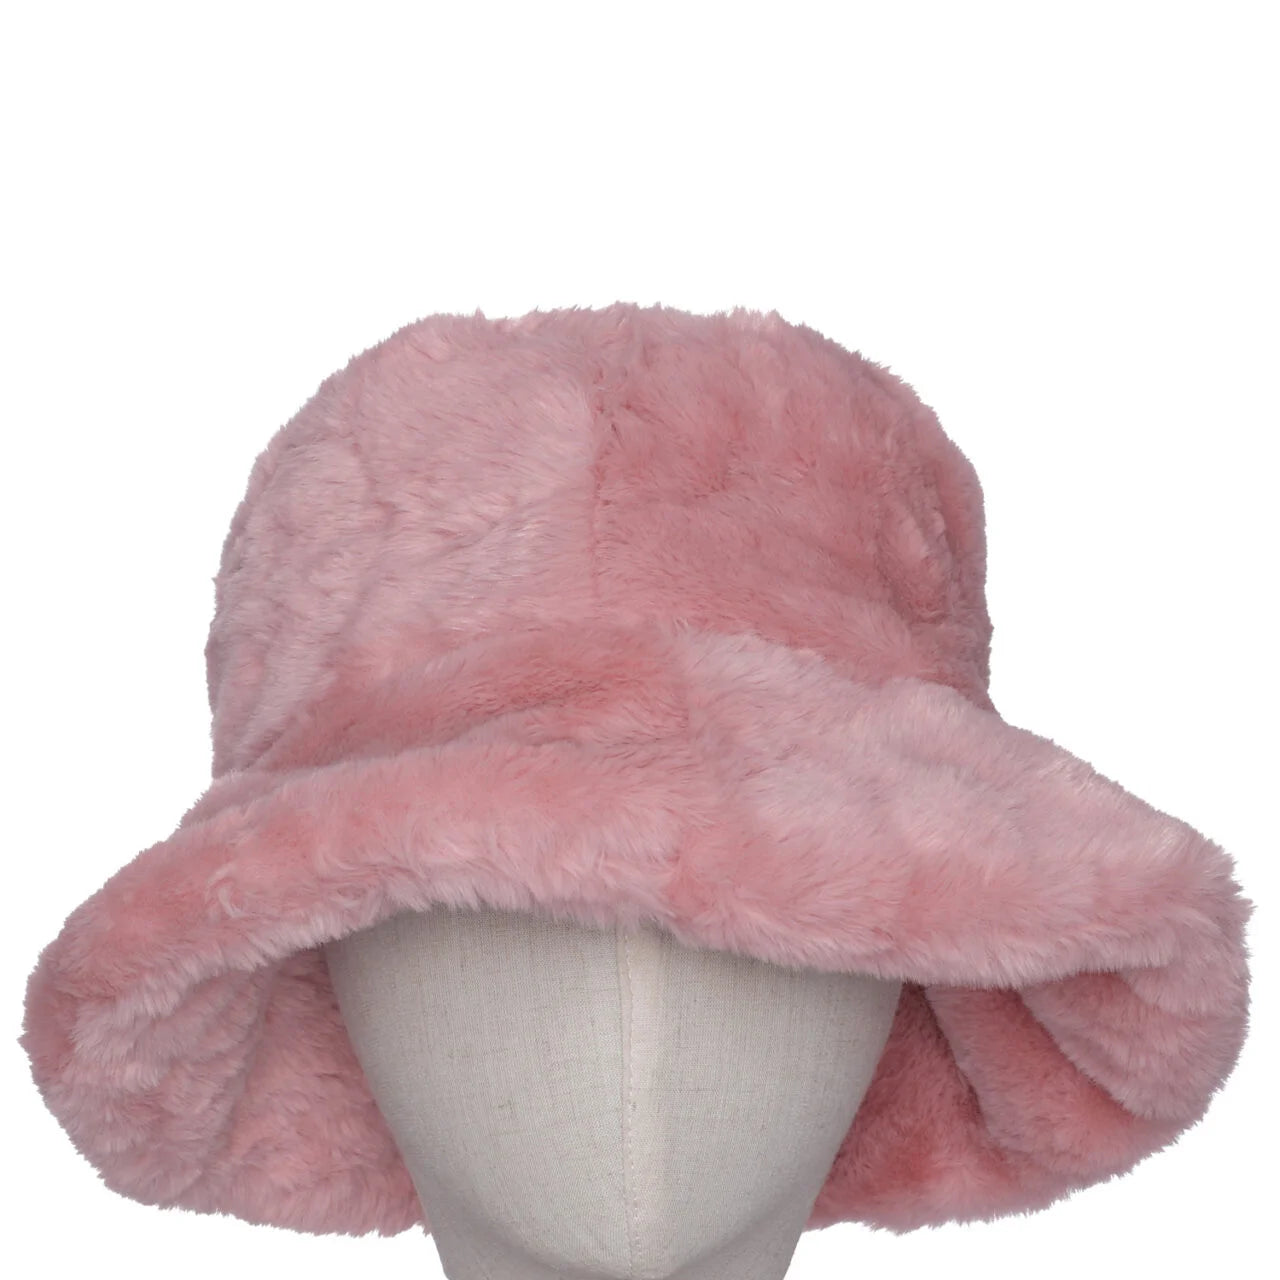 Fab Gifts | Winter Accessories Faux Fur Bucket Hat Pink by Weirs of Baggot Street